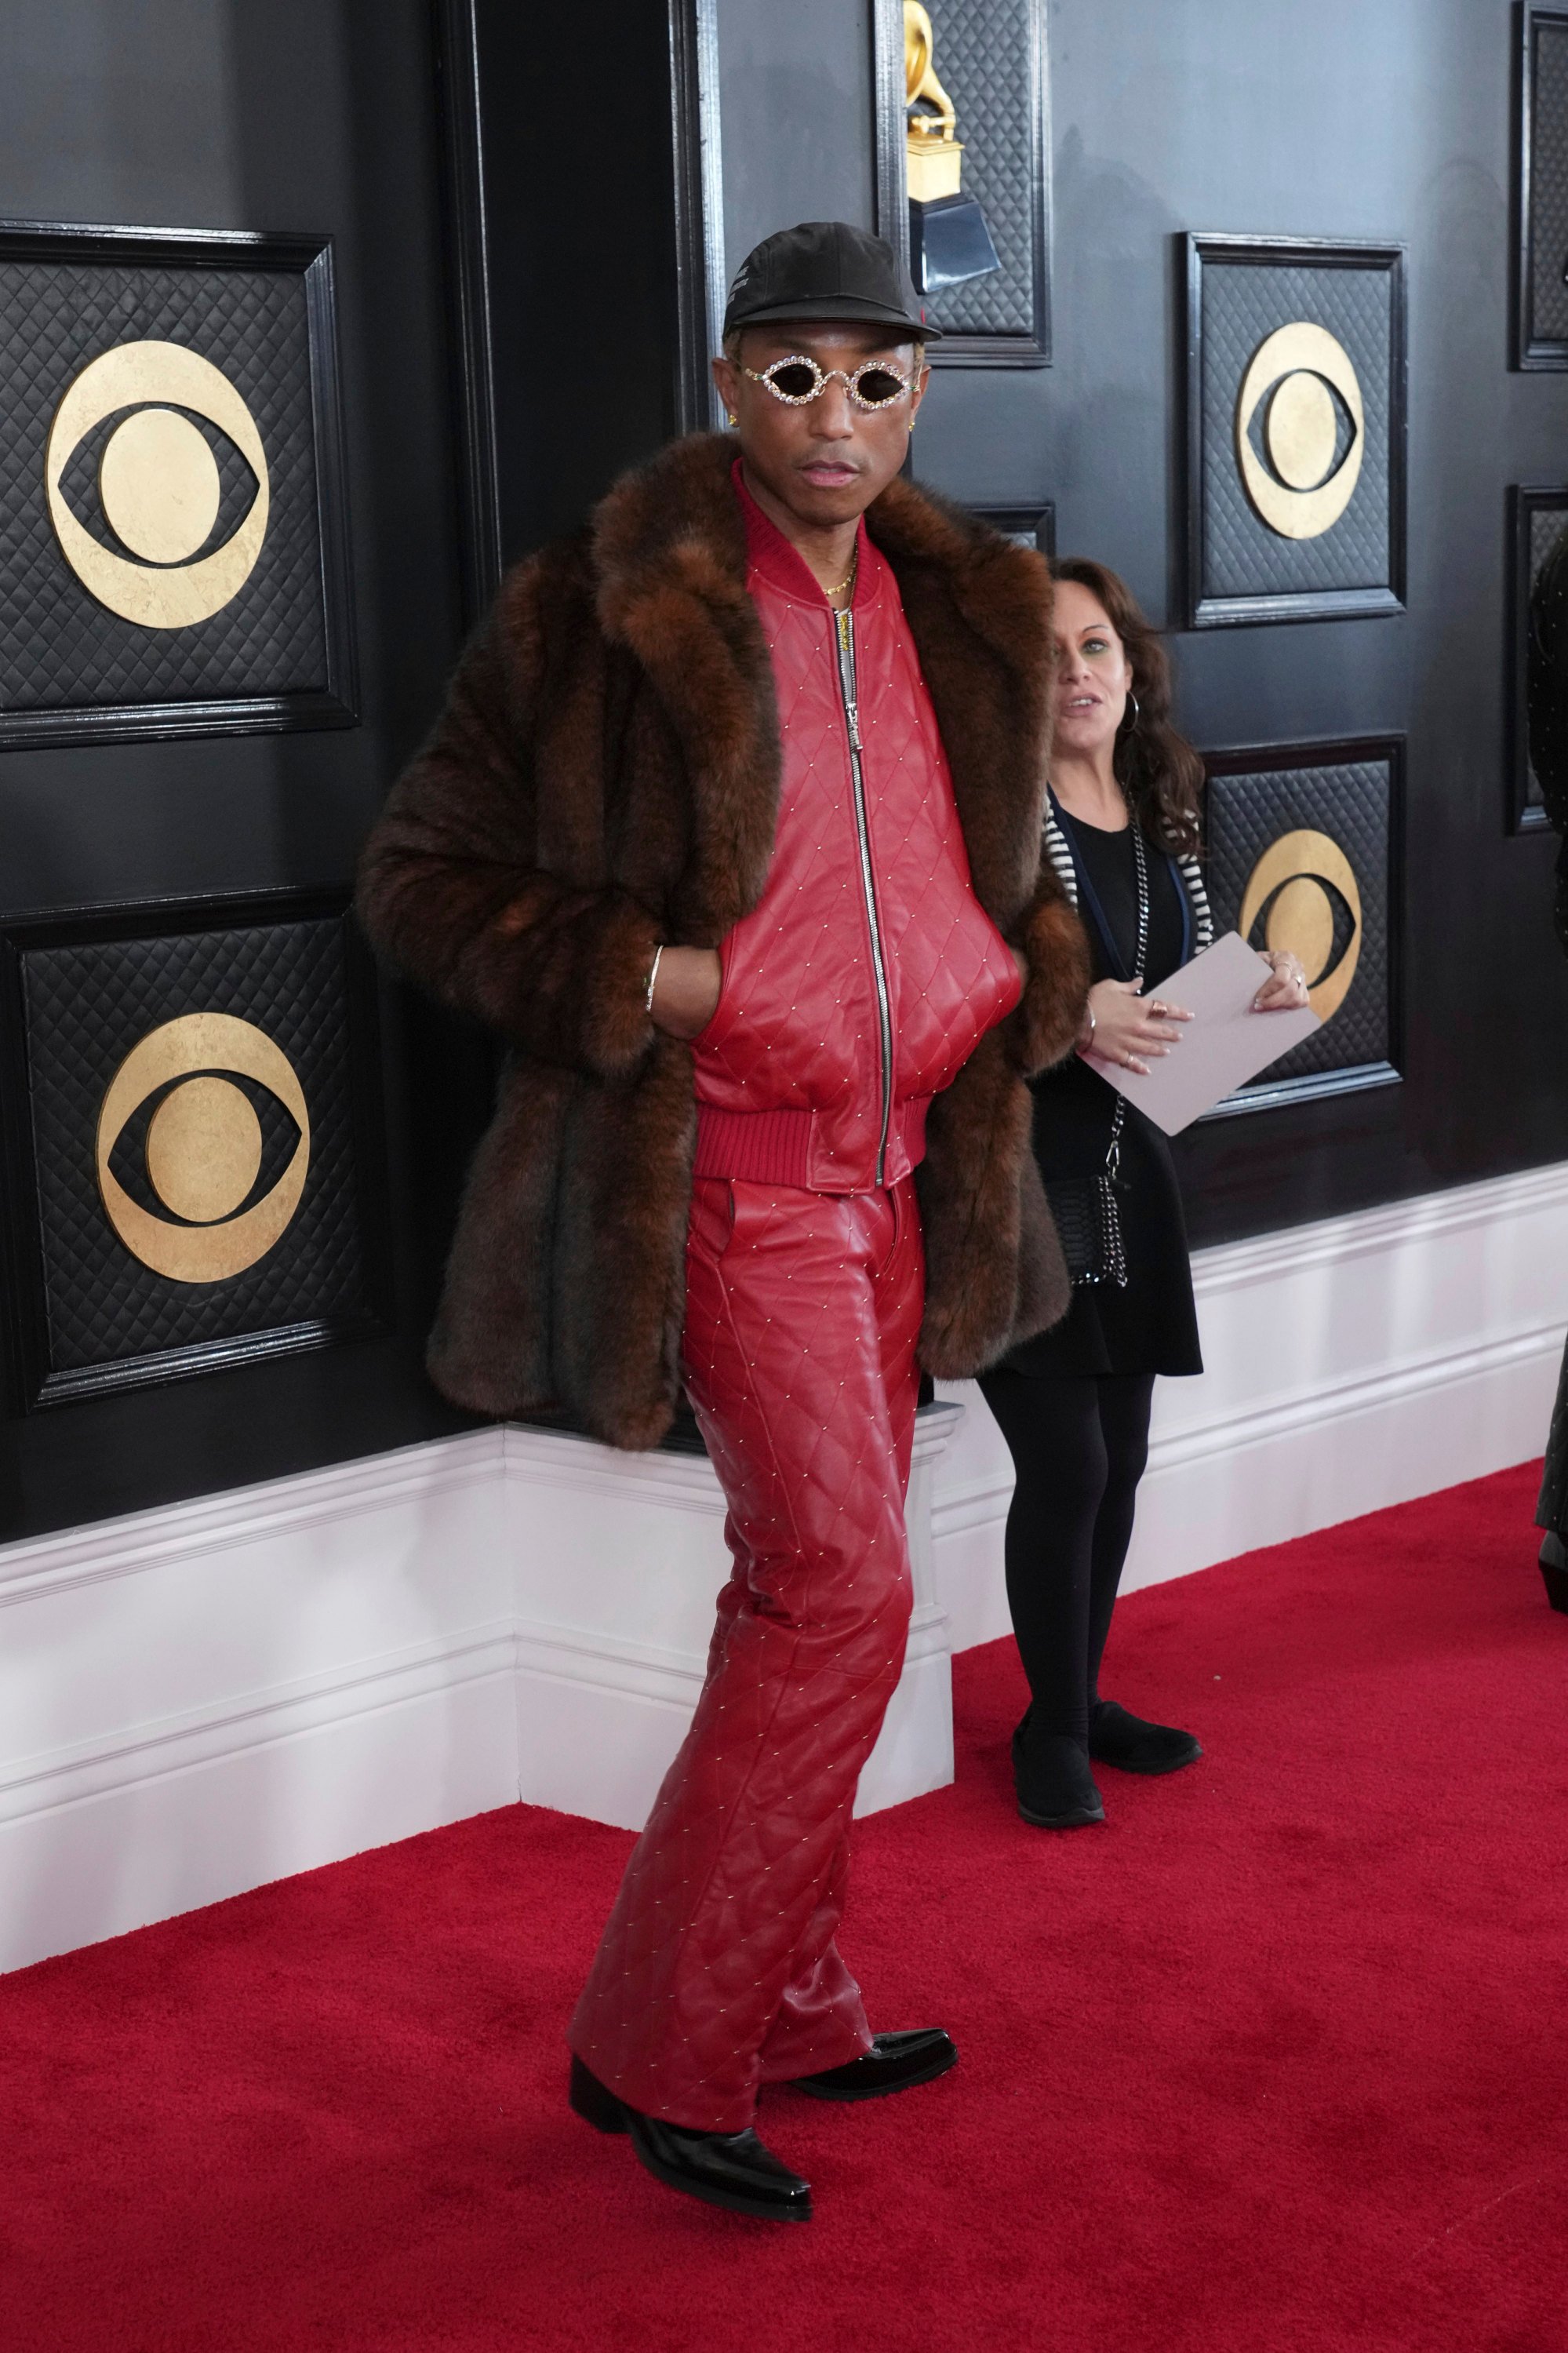 Photo: Pharrell Williams Attends the 65th Grammy Awards in Los